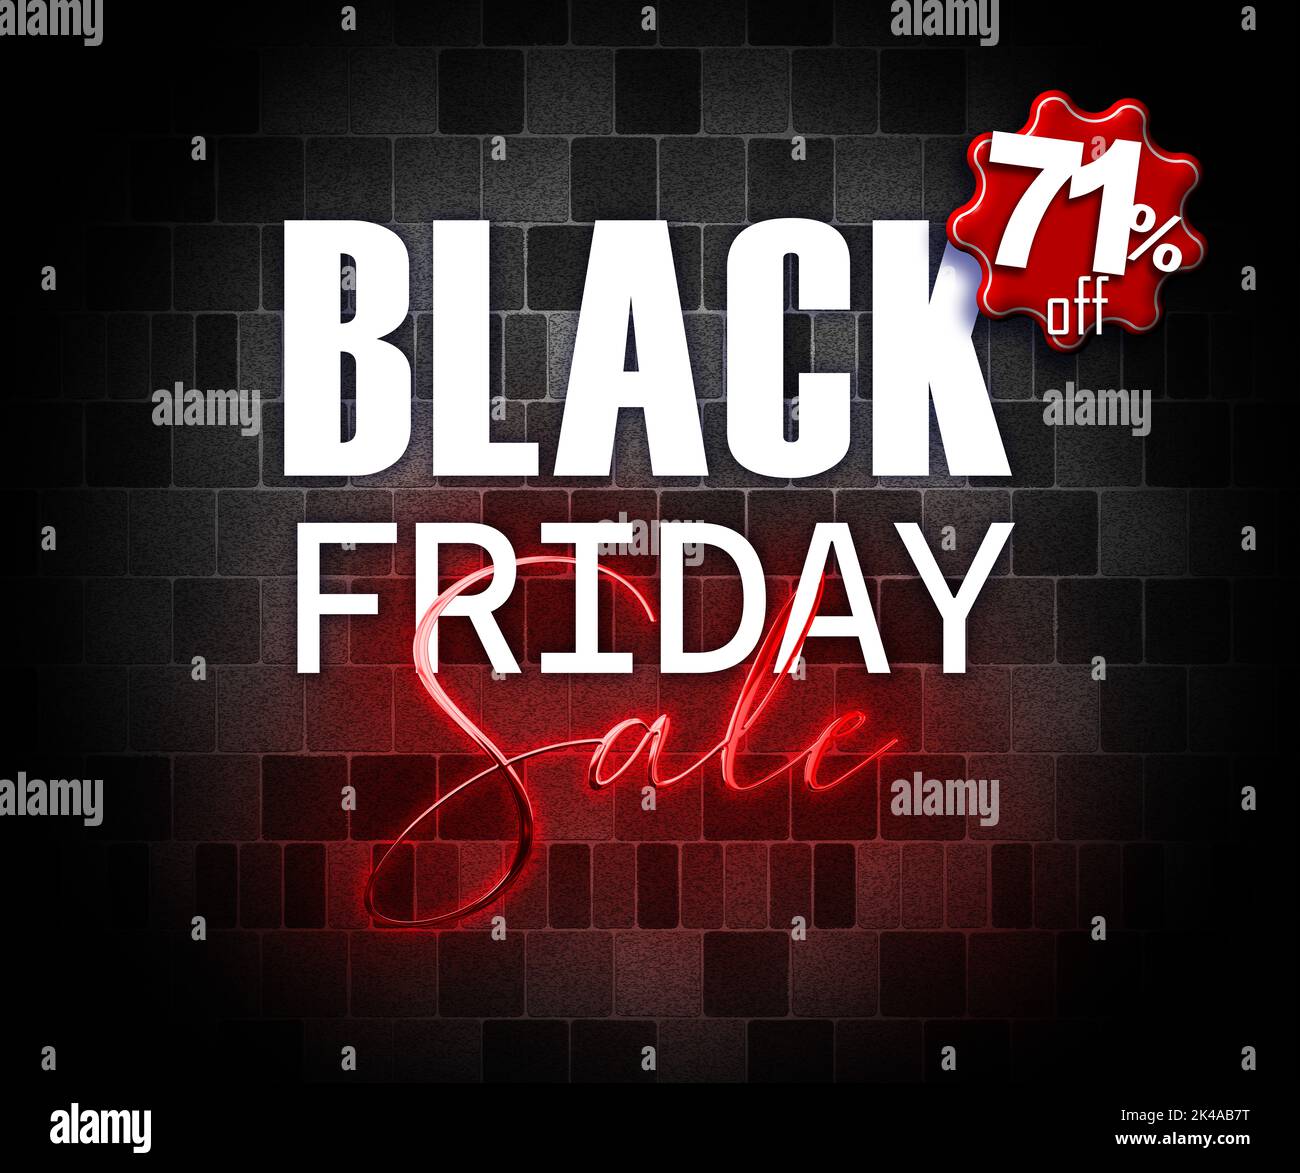 illustration with 3d elements black friday promotion banner 71 percent off sales increase Stock Photo